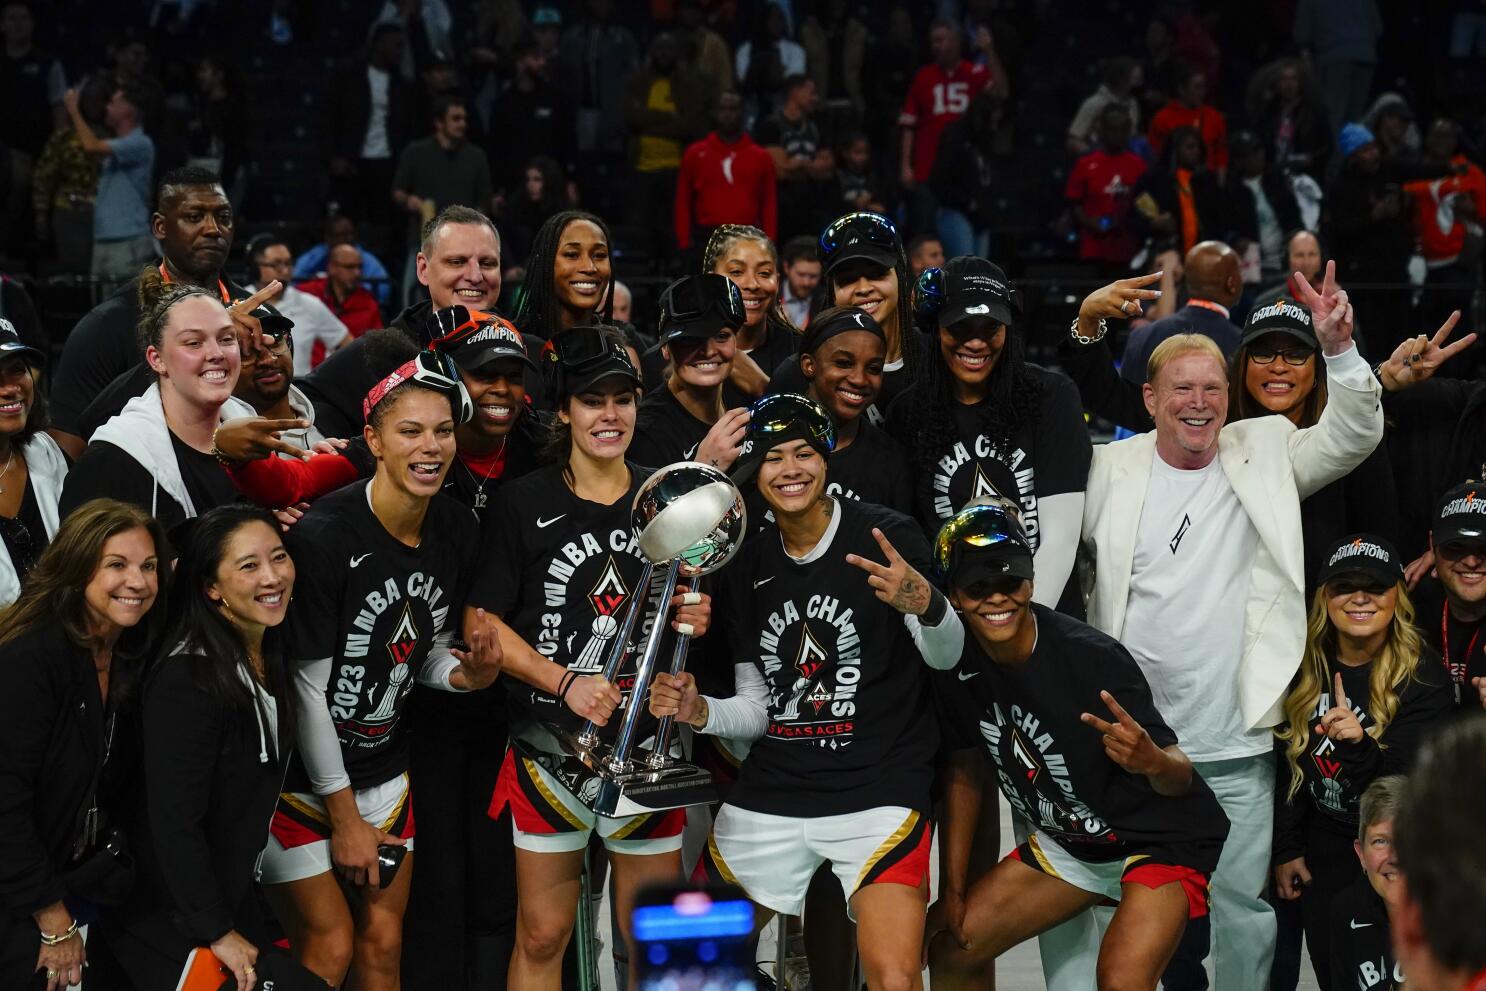 The Las Vegas Aces celebrate their championship victory.